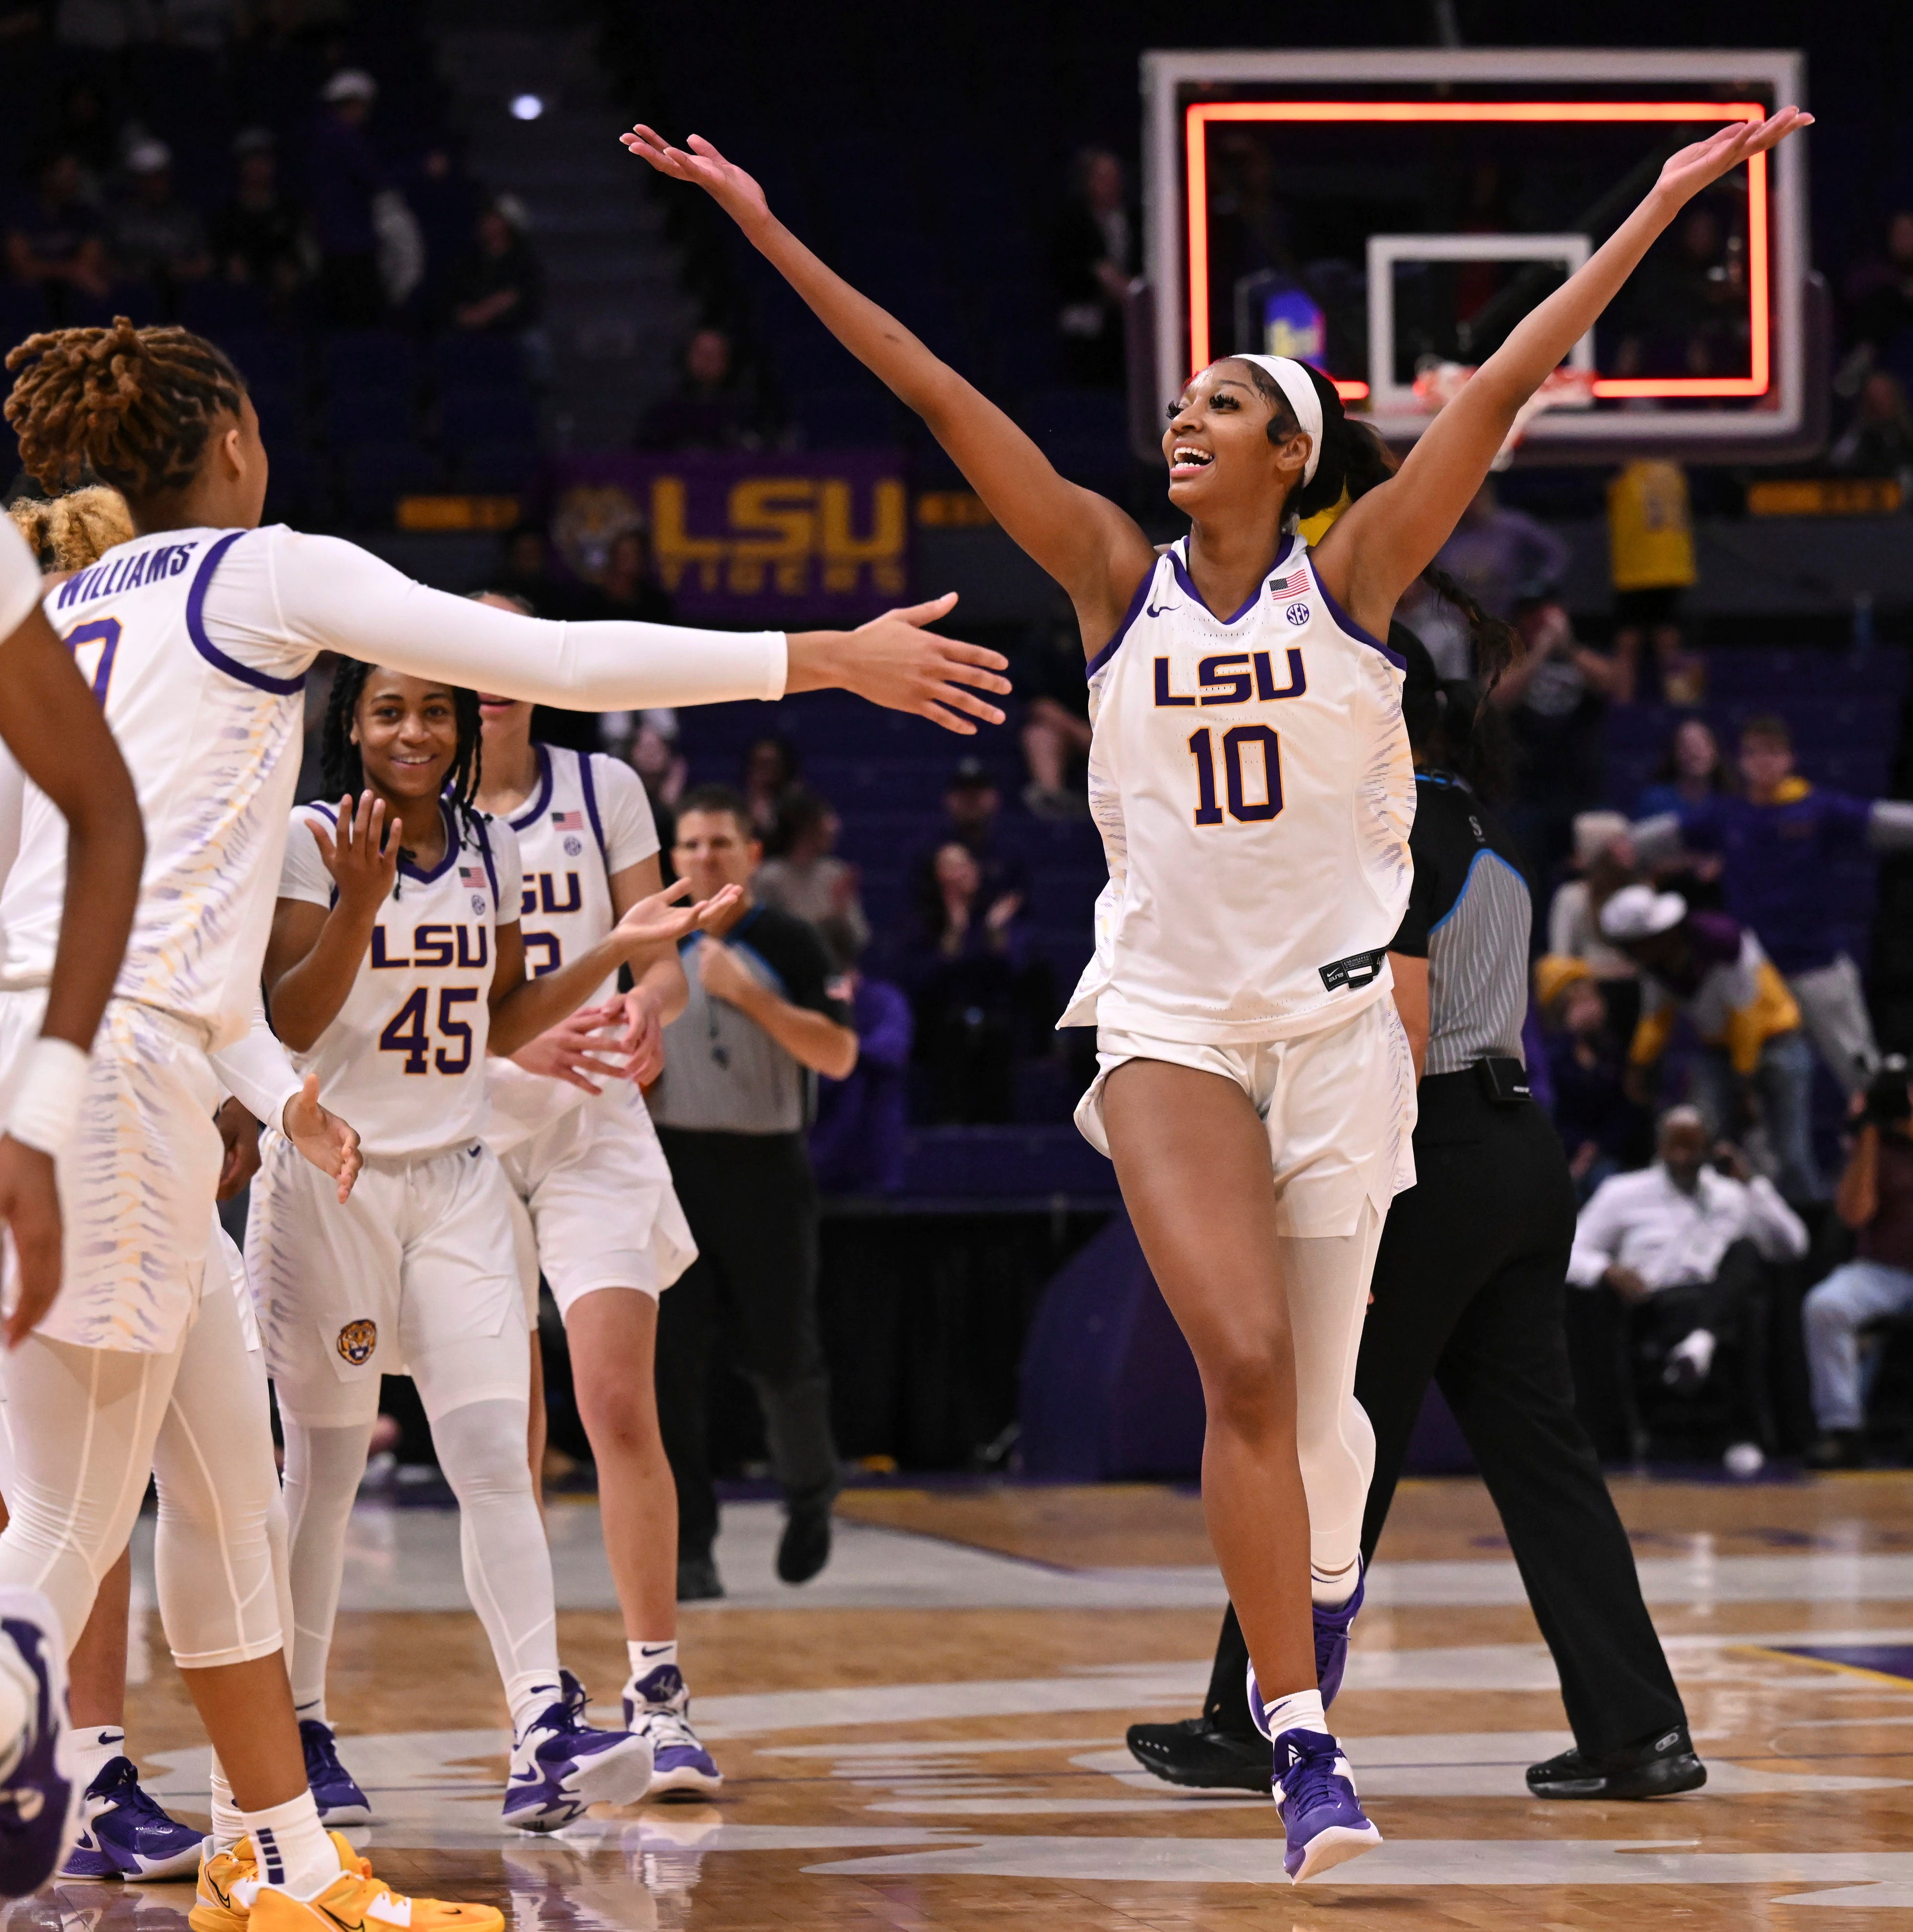 LSU forward Angel Reese (10) celebrates after making a 3-point basket against Texas A&M at the buzzer heading into halftime during an NCAA college basketball game Thursday, Jan. 5, 2023, in Baton Rouge, La. (Hilary Scheinuk/The Advocate via AP)